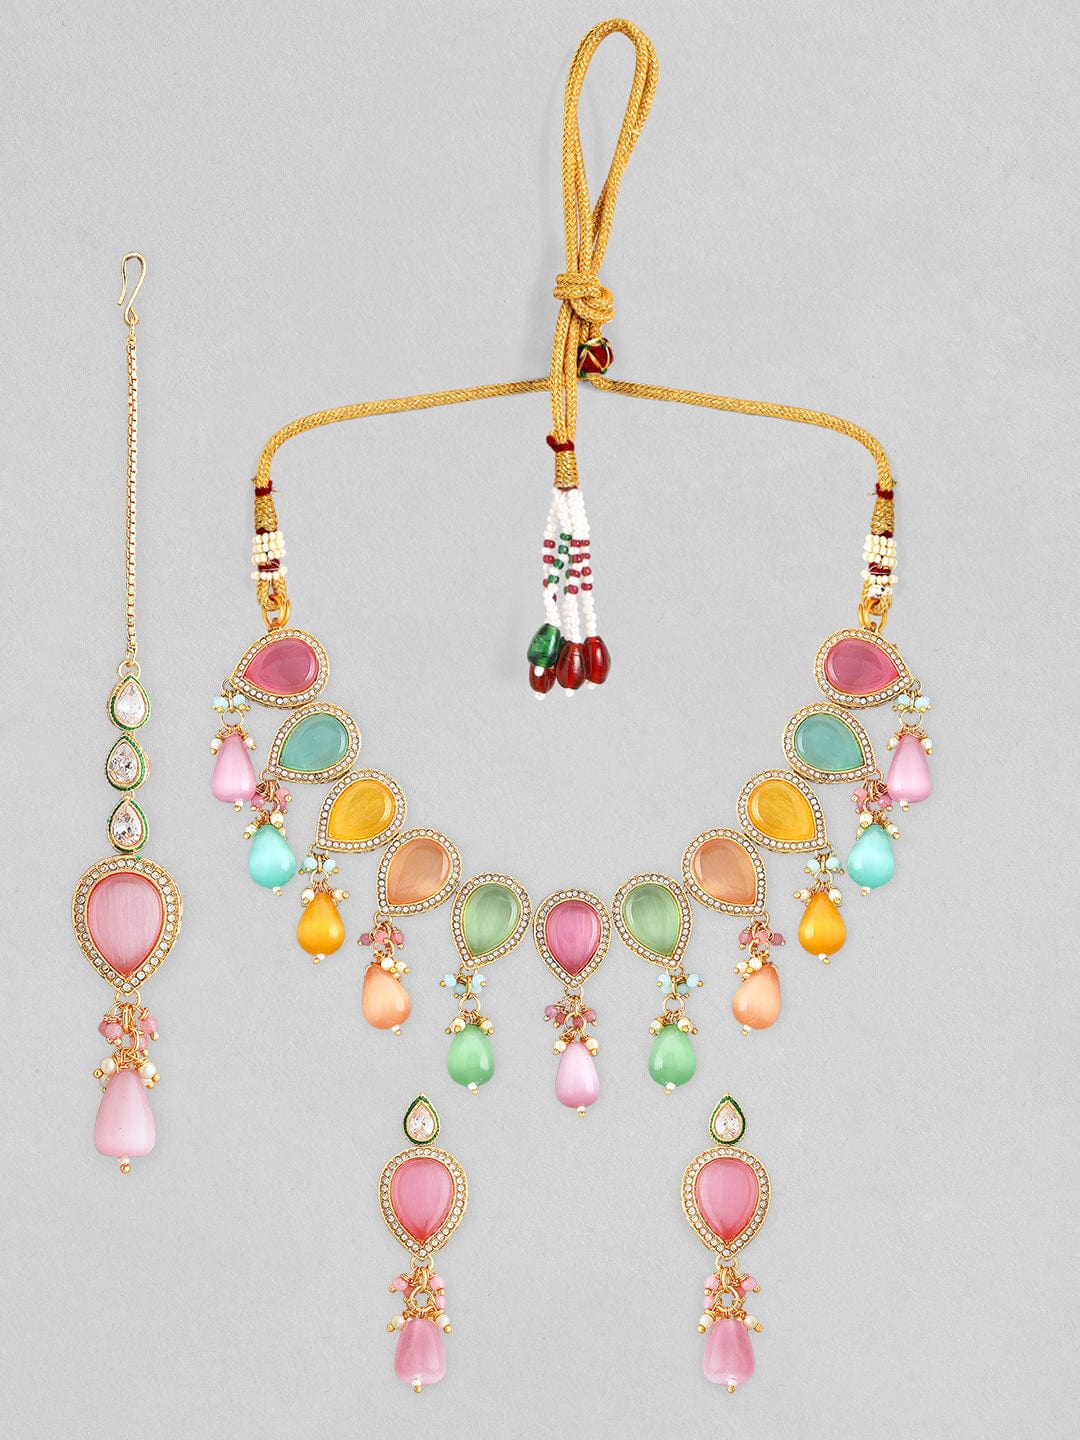 Rubans Gold Plated Necklace Set With Multicoloured Stones And Beads. Necklace Set